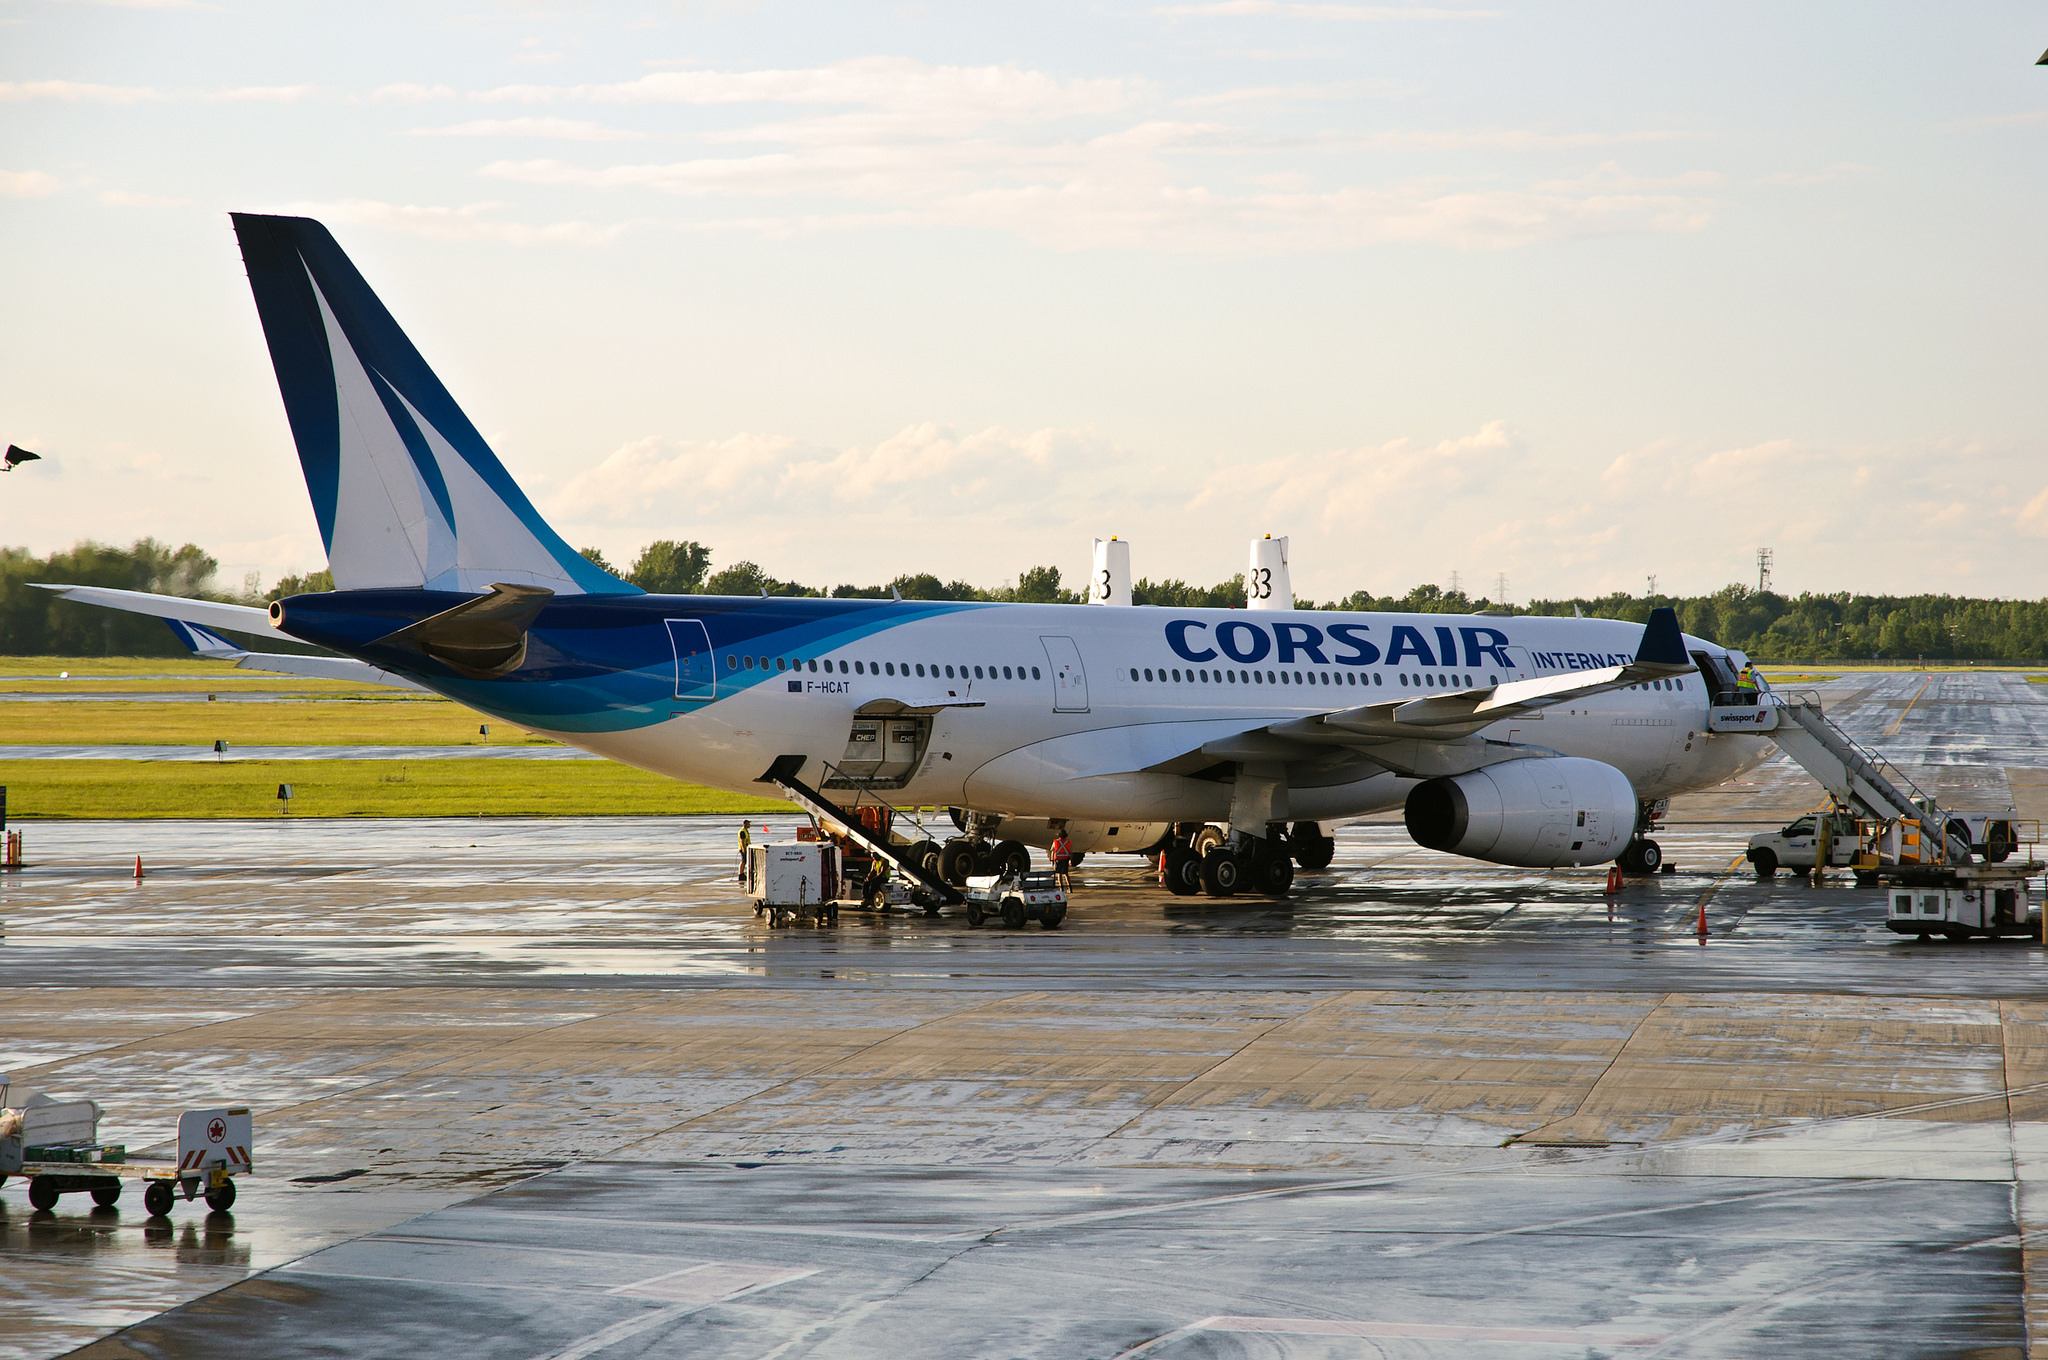 Corsair A330-200 F-HCATpar Caribb sous (CC BY-NC-ND 2.0) https://www.flickr.com/photos/caribb/19176040389/ https://creativecommons.org/licenses/by-nc-nd/2.0/